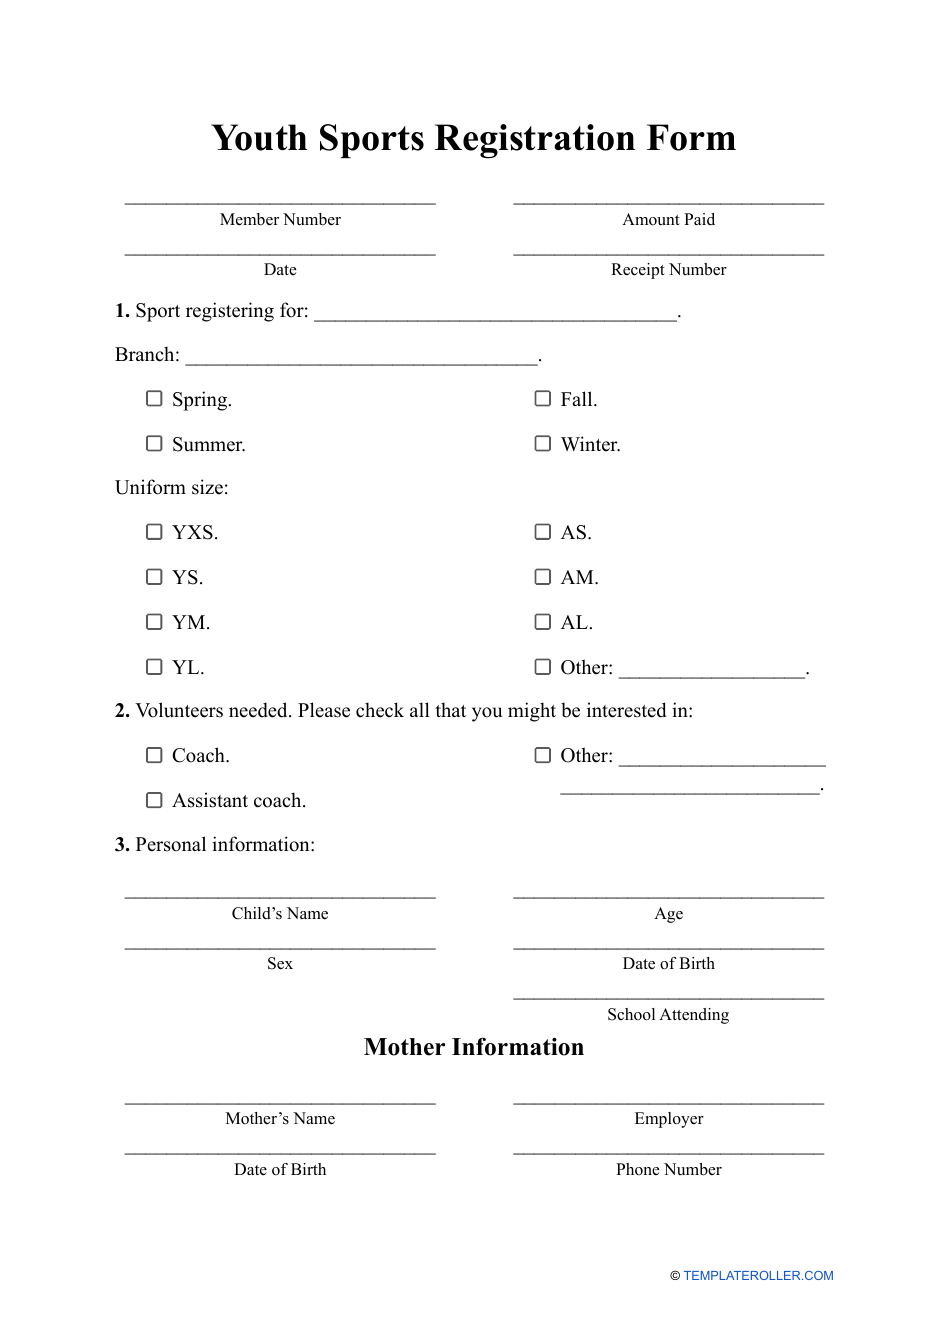 Youth Sports Registration Form, Page 1